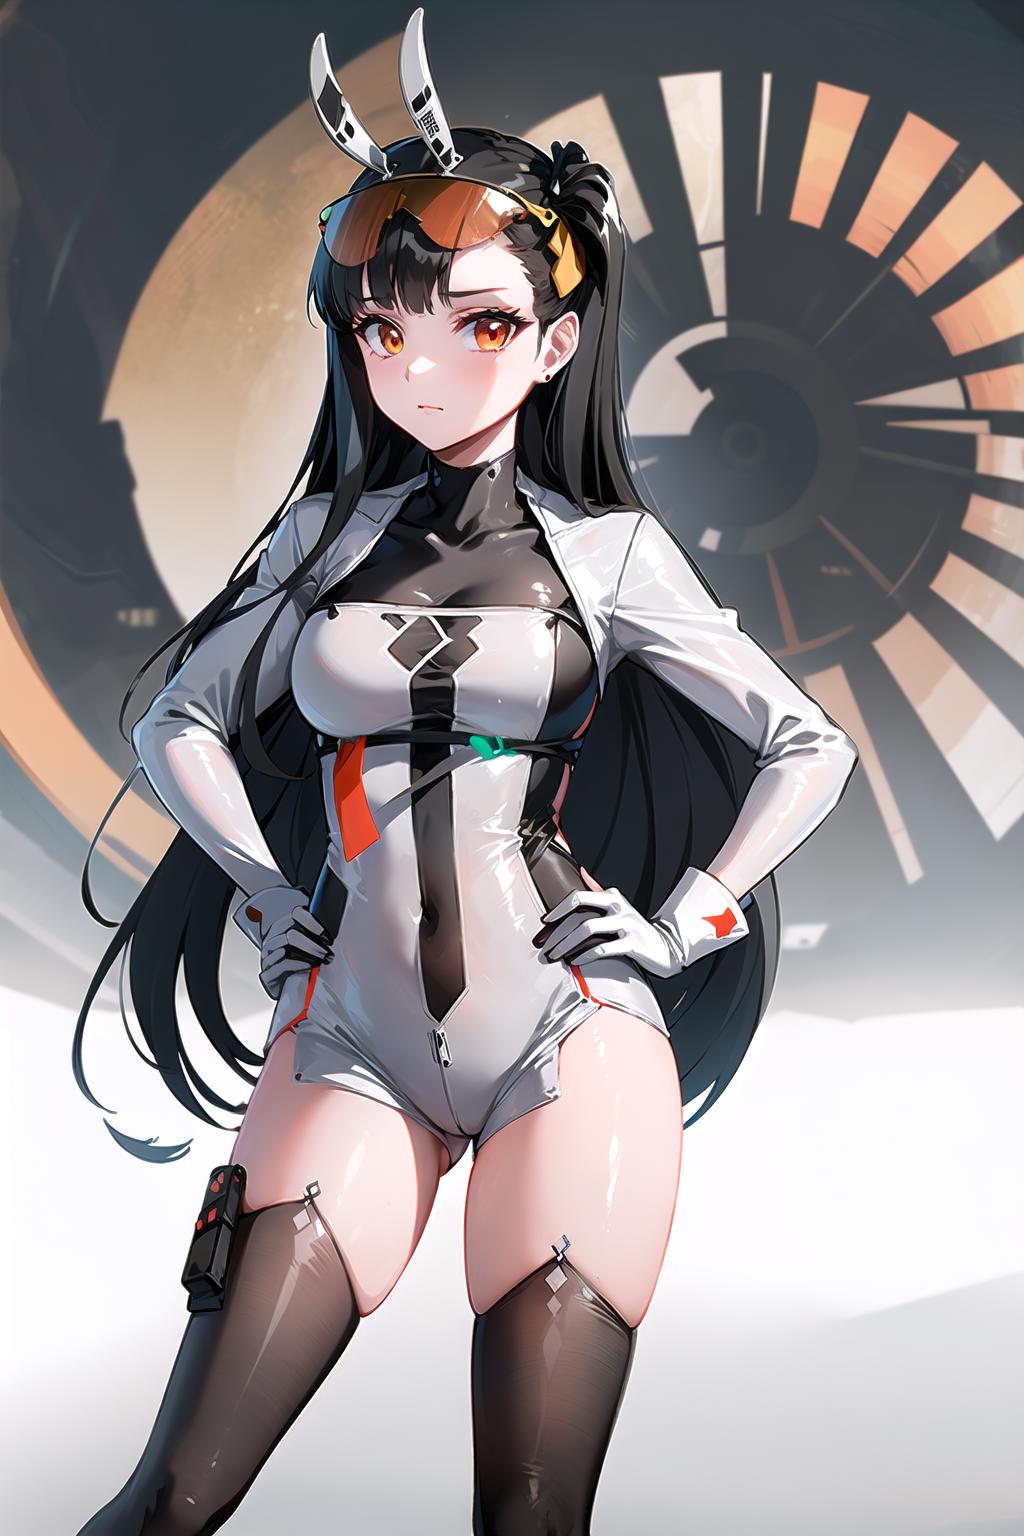 Girls' Frontline-QBZ-191 image by L_A_X